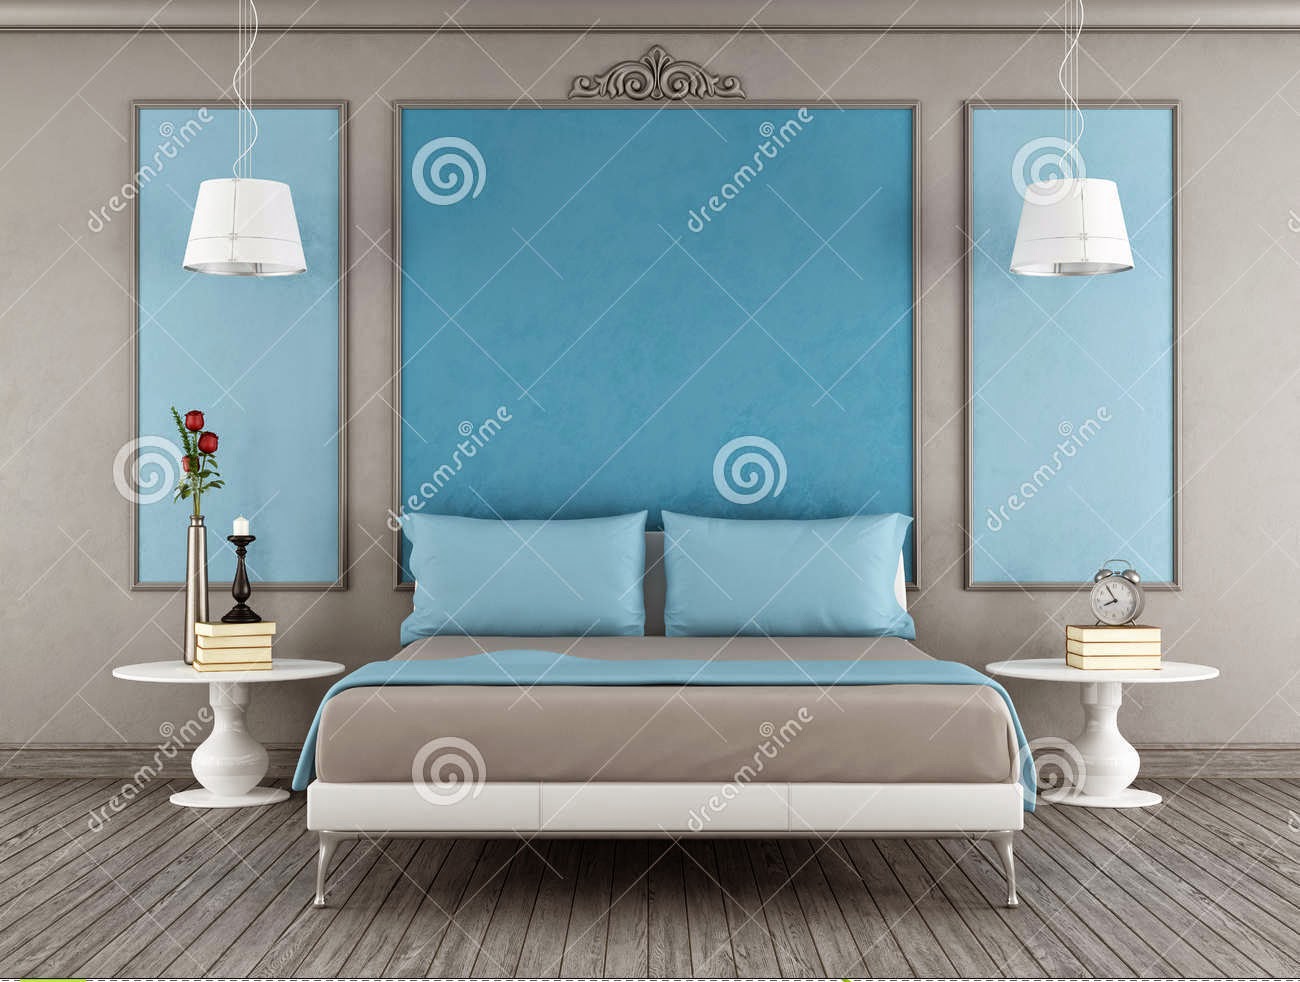 20 Blue bedroom ideas and designs for inspiration